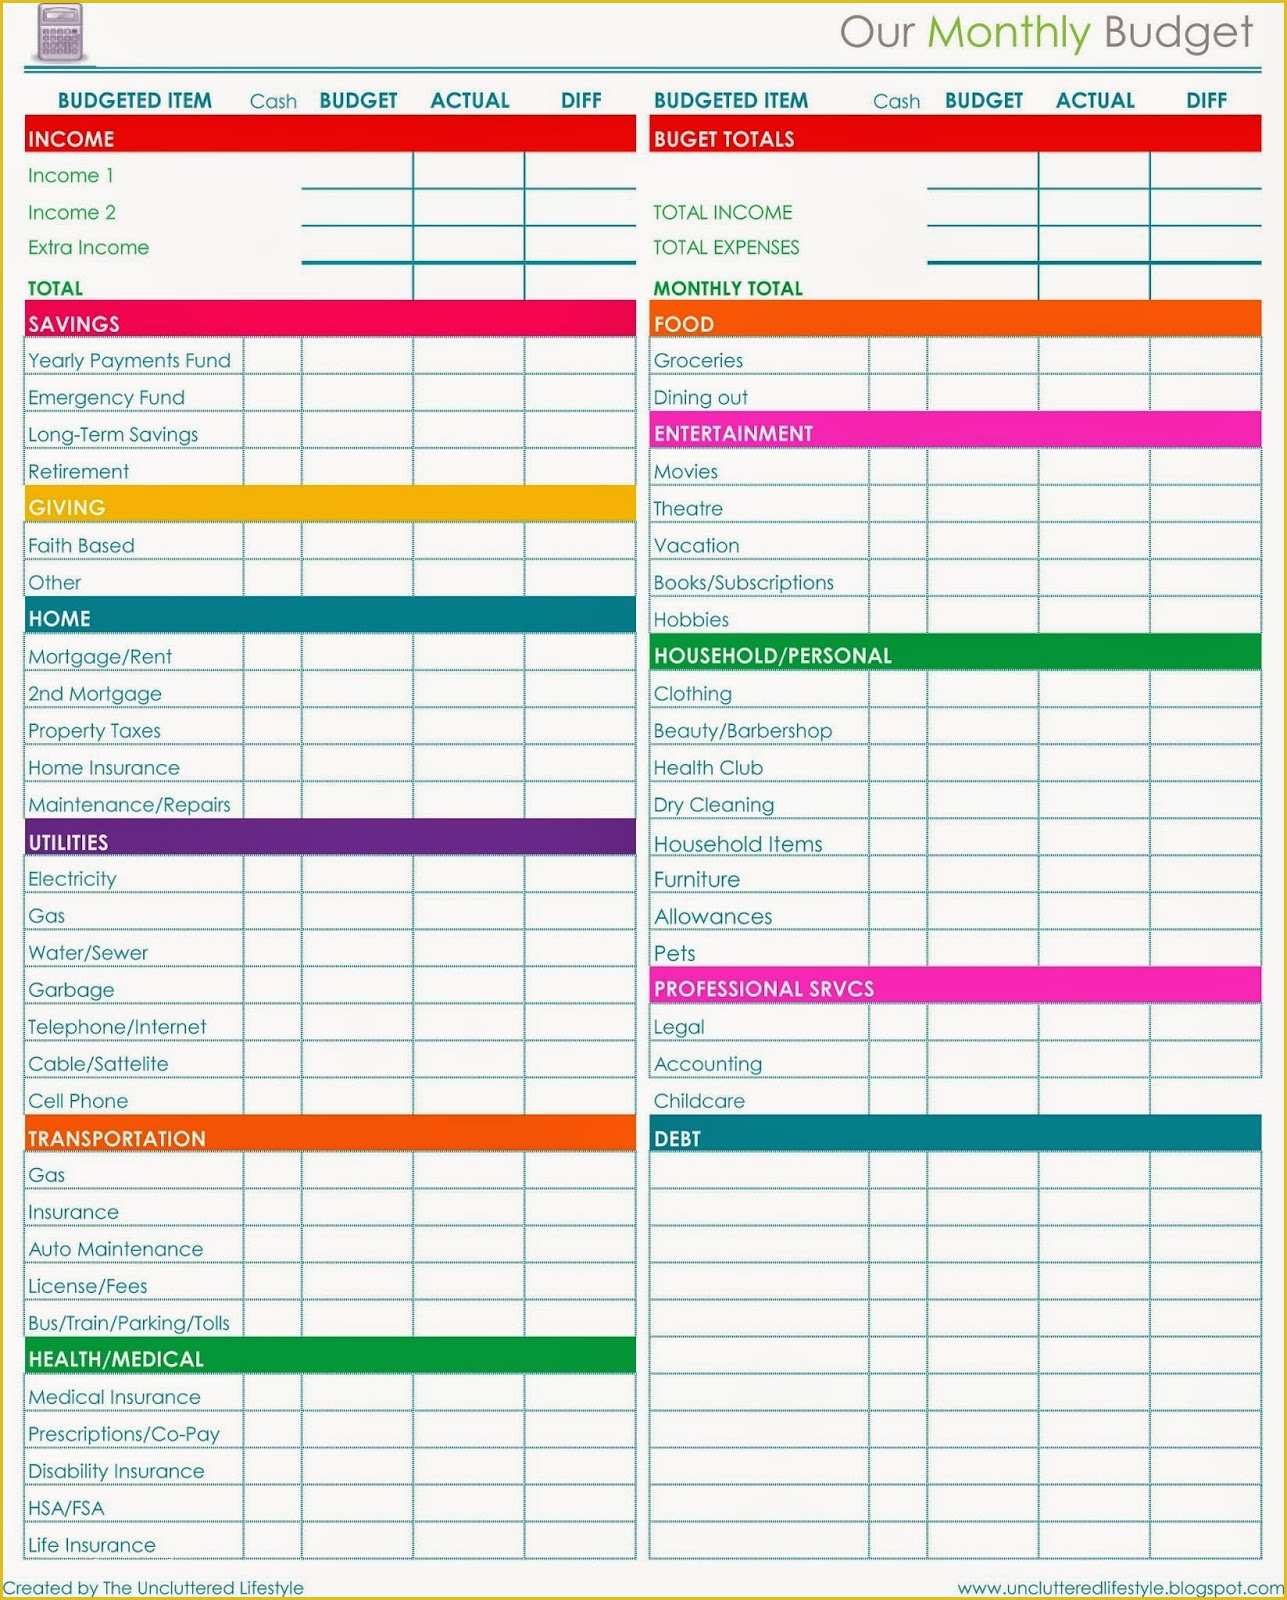 Bill Tracker Template Free Of 2015 Planner More Free Printables Find Lifestyle